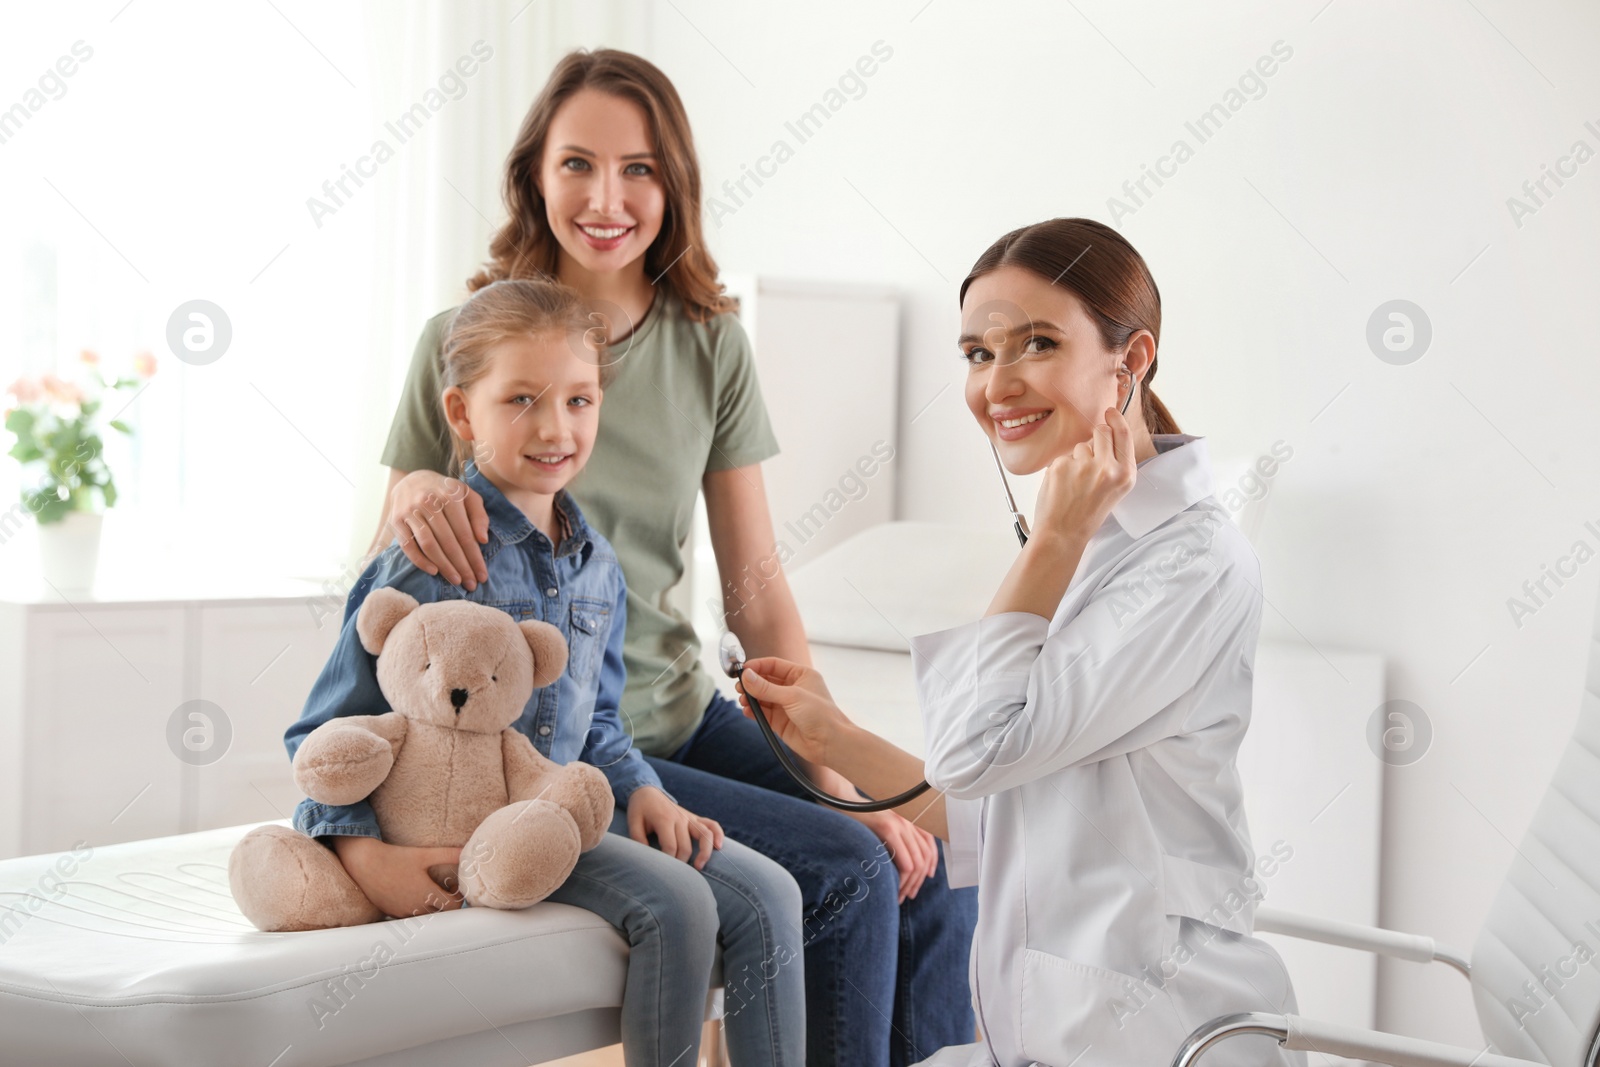 Photo of Mother and daughter visiting pediatrician. Doctor examining little patient with stethoscope in hospital